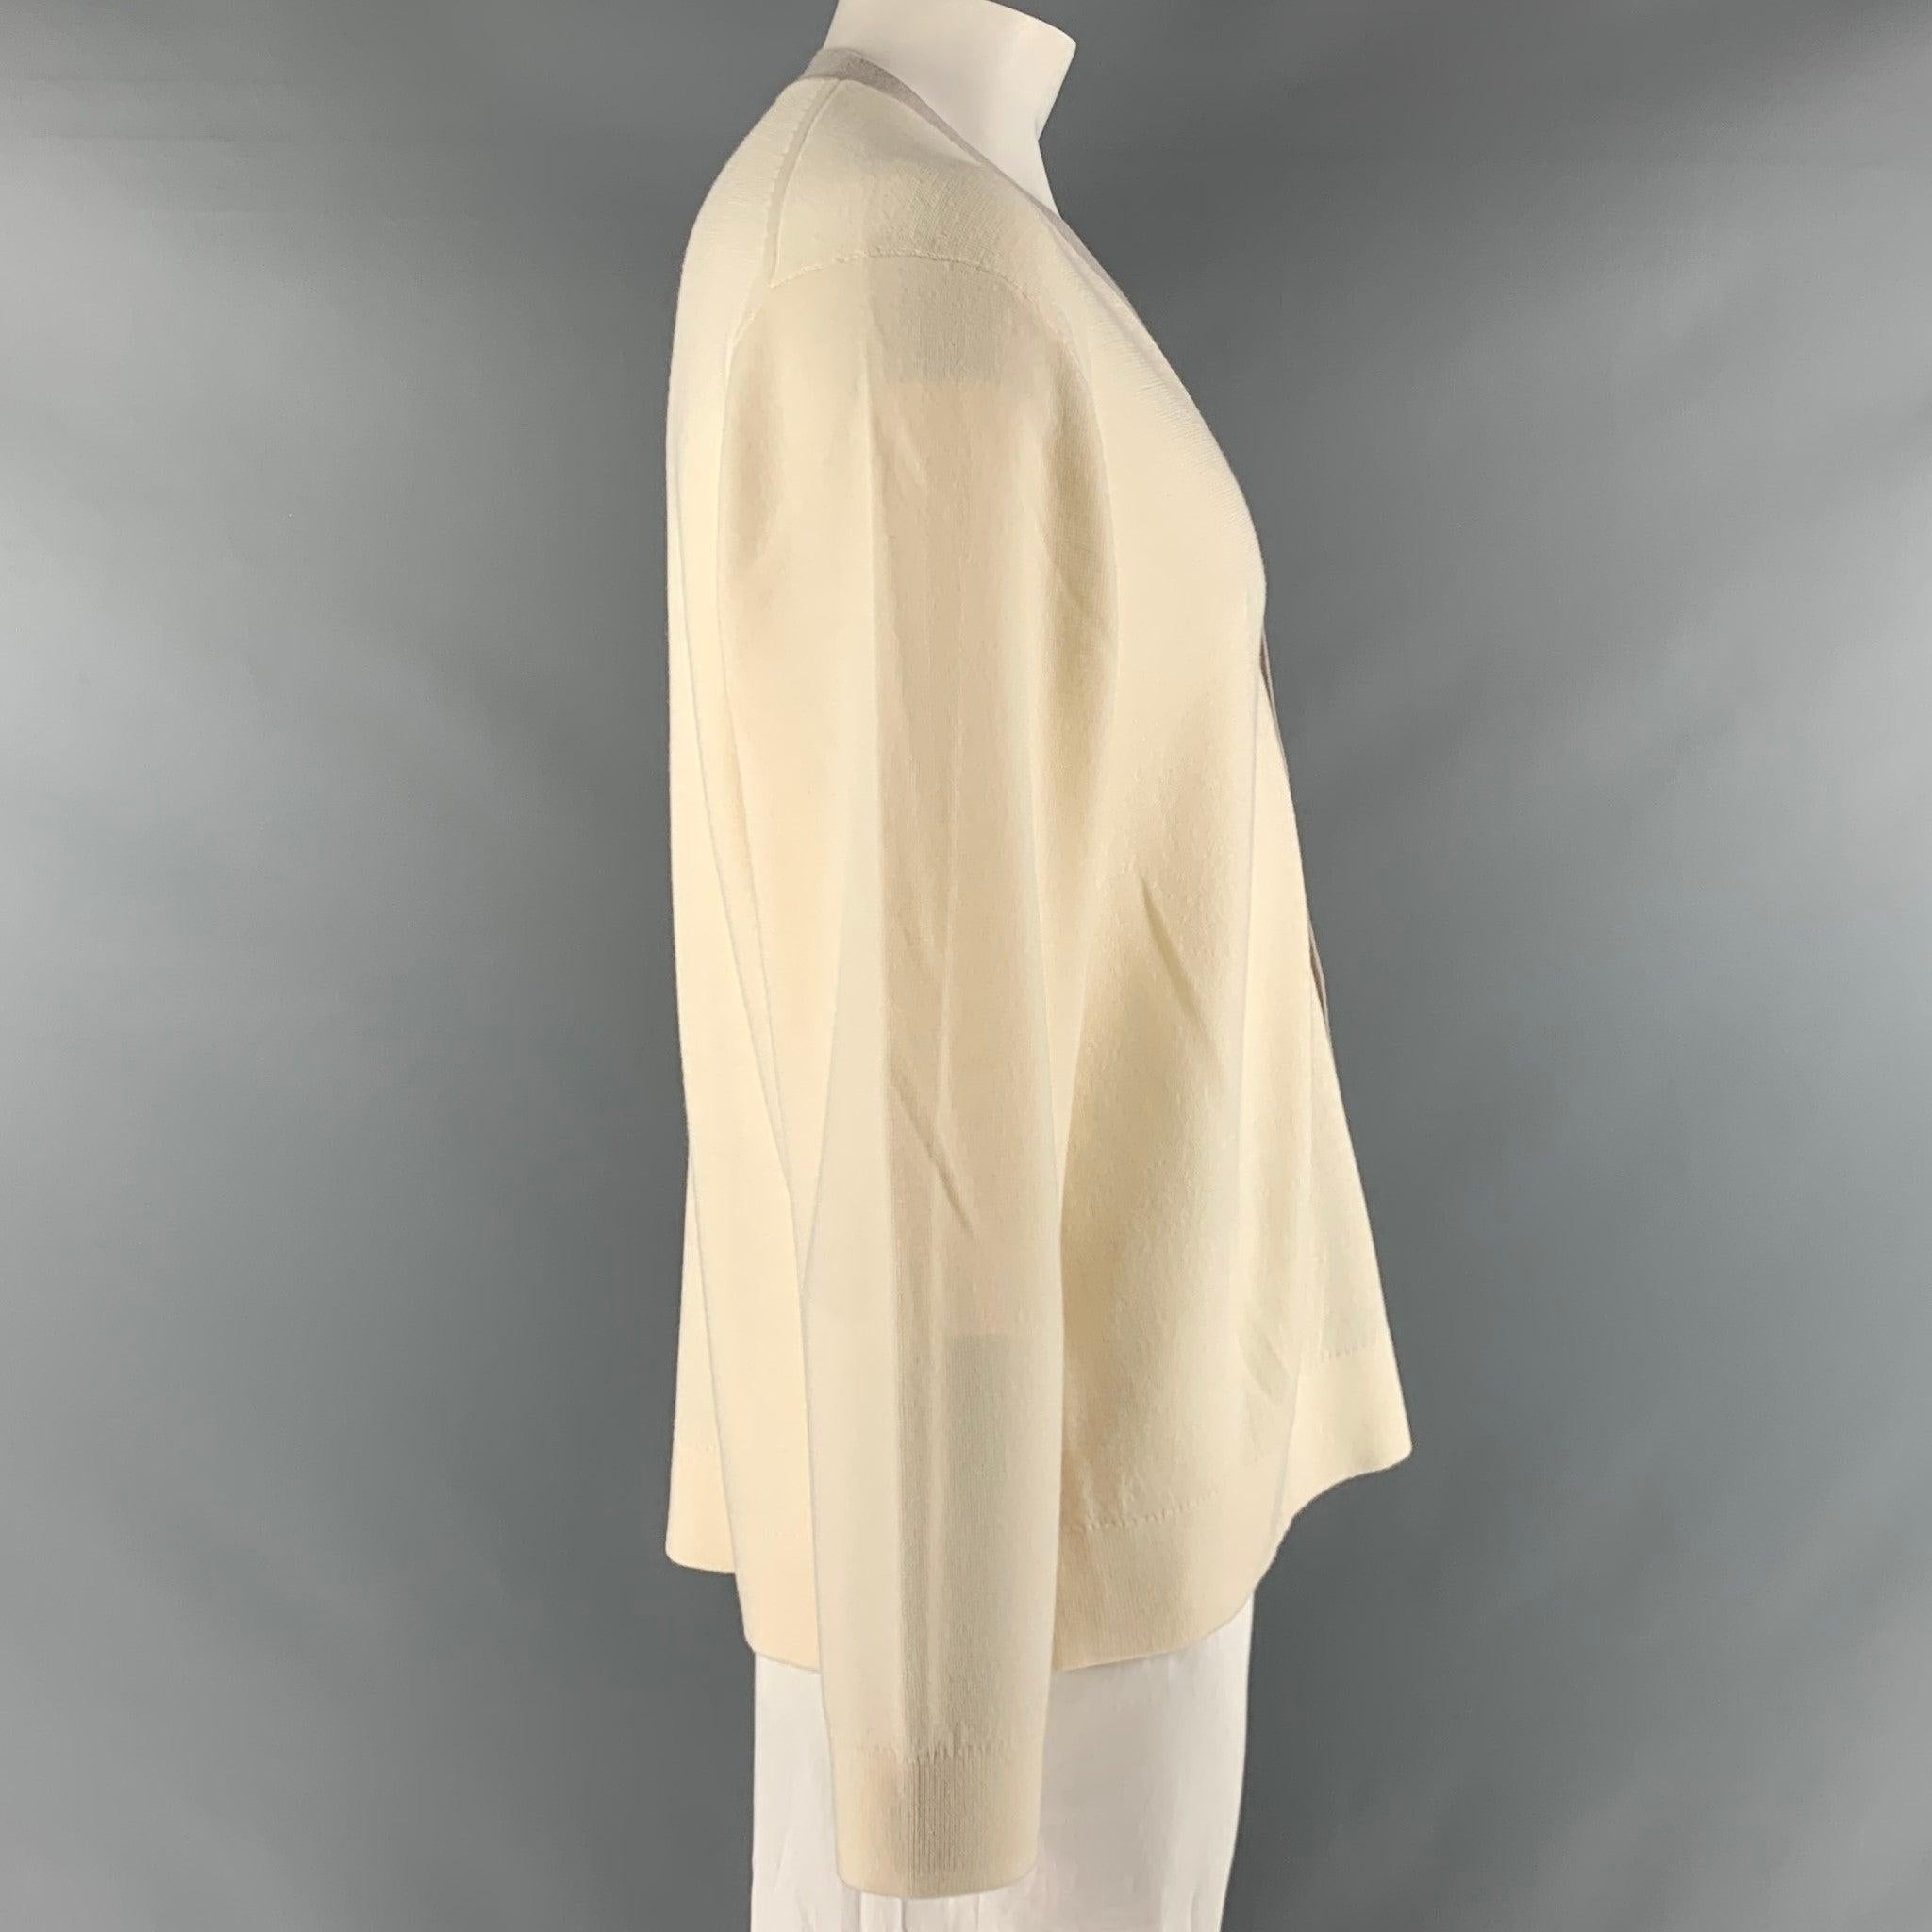 THEORY cardigan comes in a cream and taupe merino wool blend knit material featuring V-neck, and a buttoned closure. Excellent Pre-Owned Condition. 

Marked:   XXL 

Measurements: 
 
Shoulder: 21 inches Chest: 52 inches Sleeve: 26.5 inches Length: